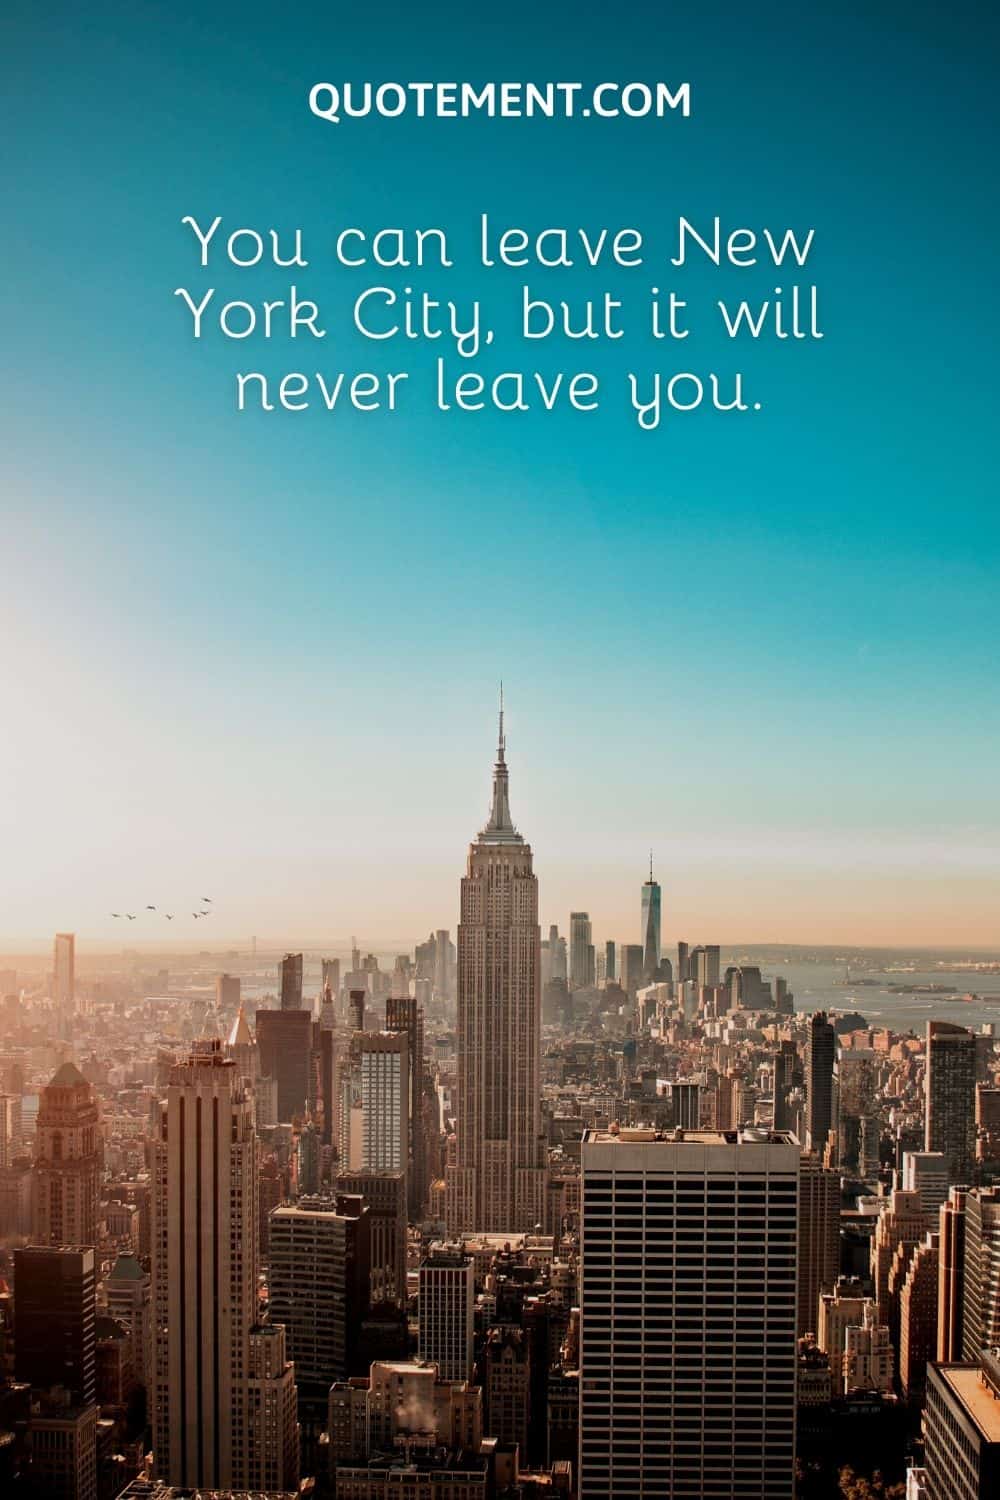 You can leave New York City, but it will never leave you